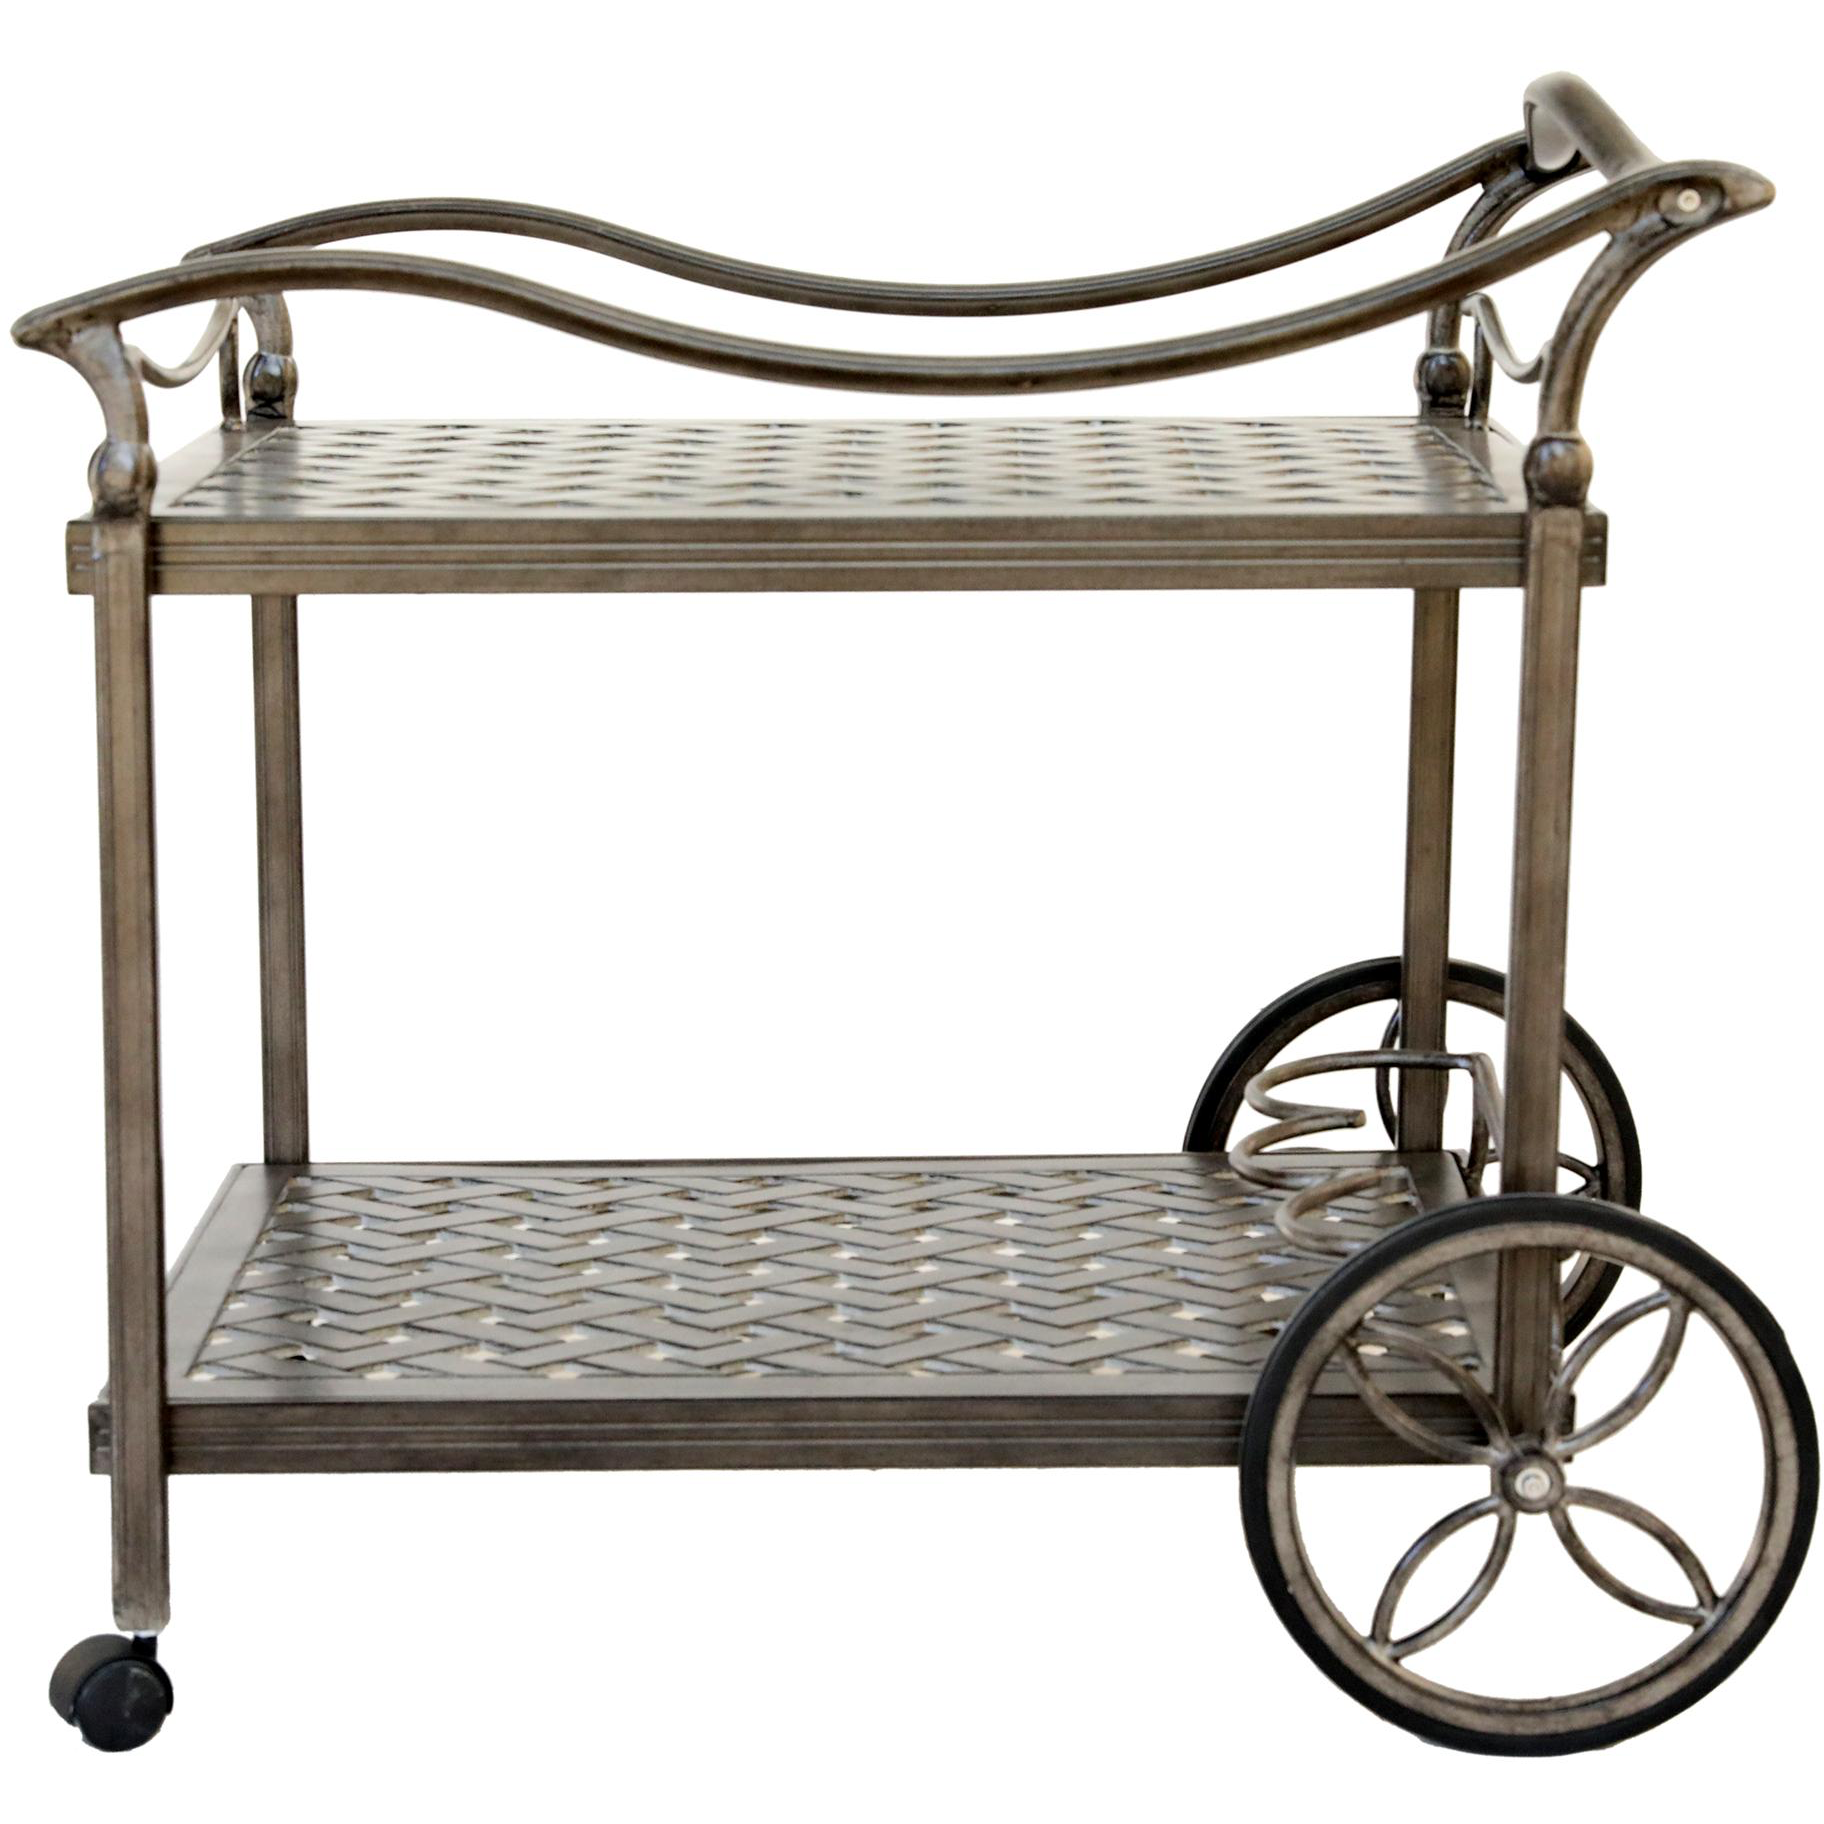 Castlerock Outdoor Tea Cart: A stylish and versatile cart for outdoor entertaining. Durable aluminum frame with weather-resistant finish. Features spacious shelves and convenient handles for easy serving and mobility. Elevate your outdoor space with this elegant and functional tea cart by Gathercraft.